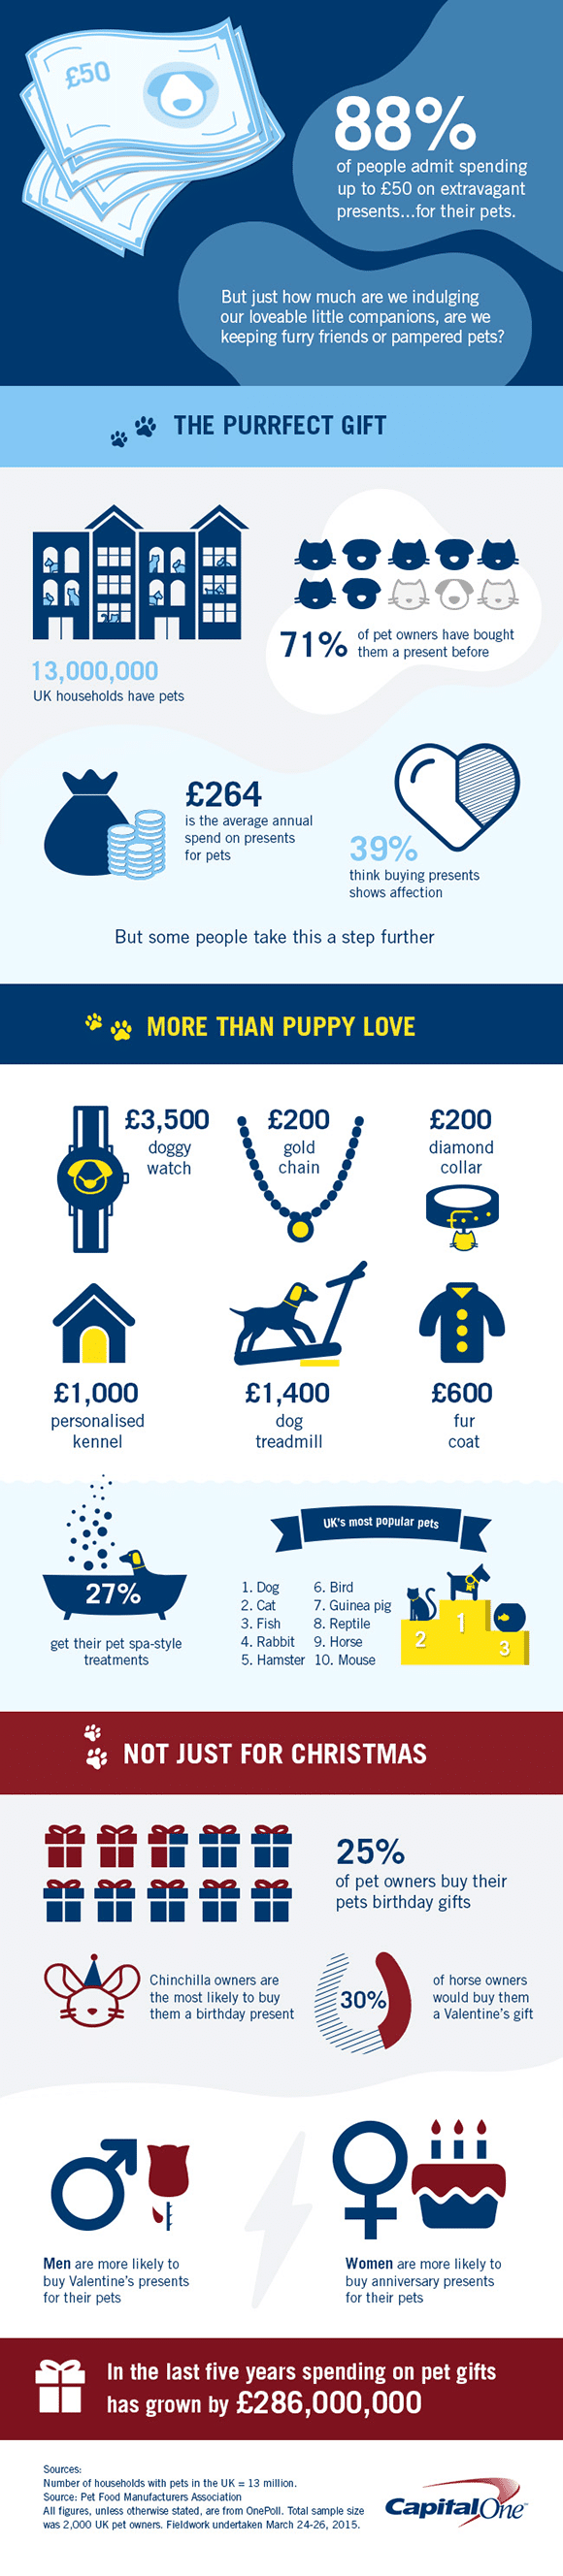 Pampered Pets – How Much Do Brits Spend On Their Pets? [Infographic]